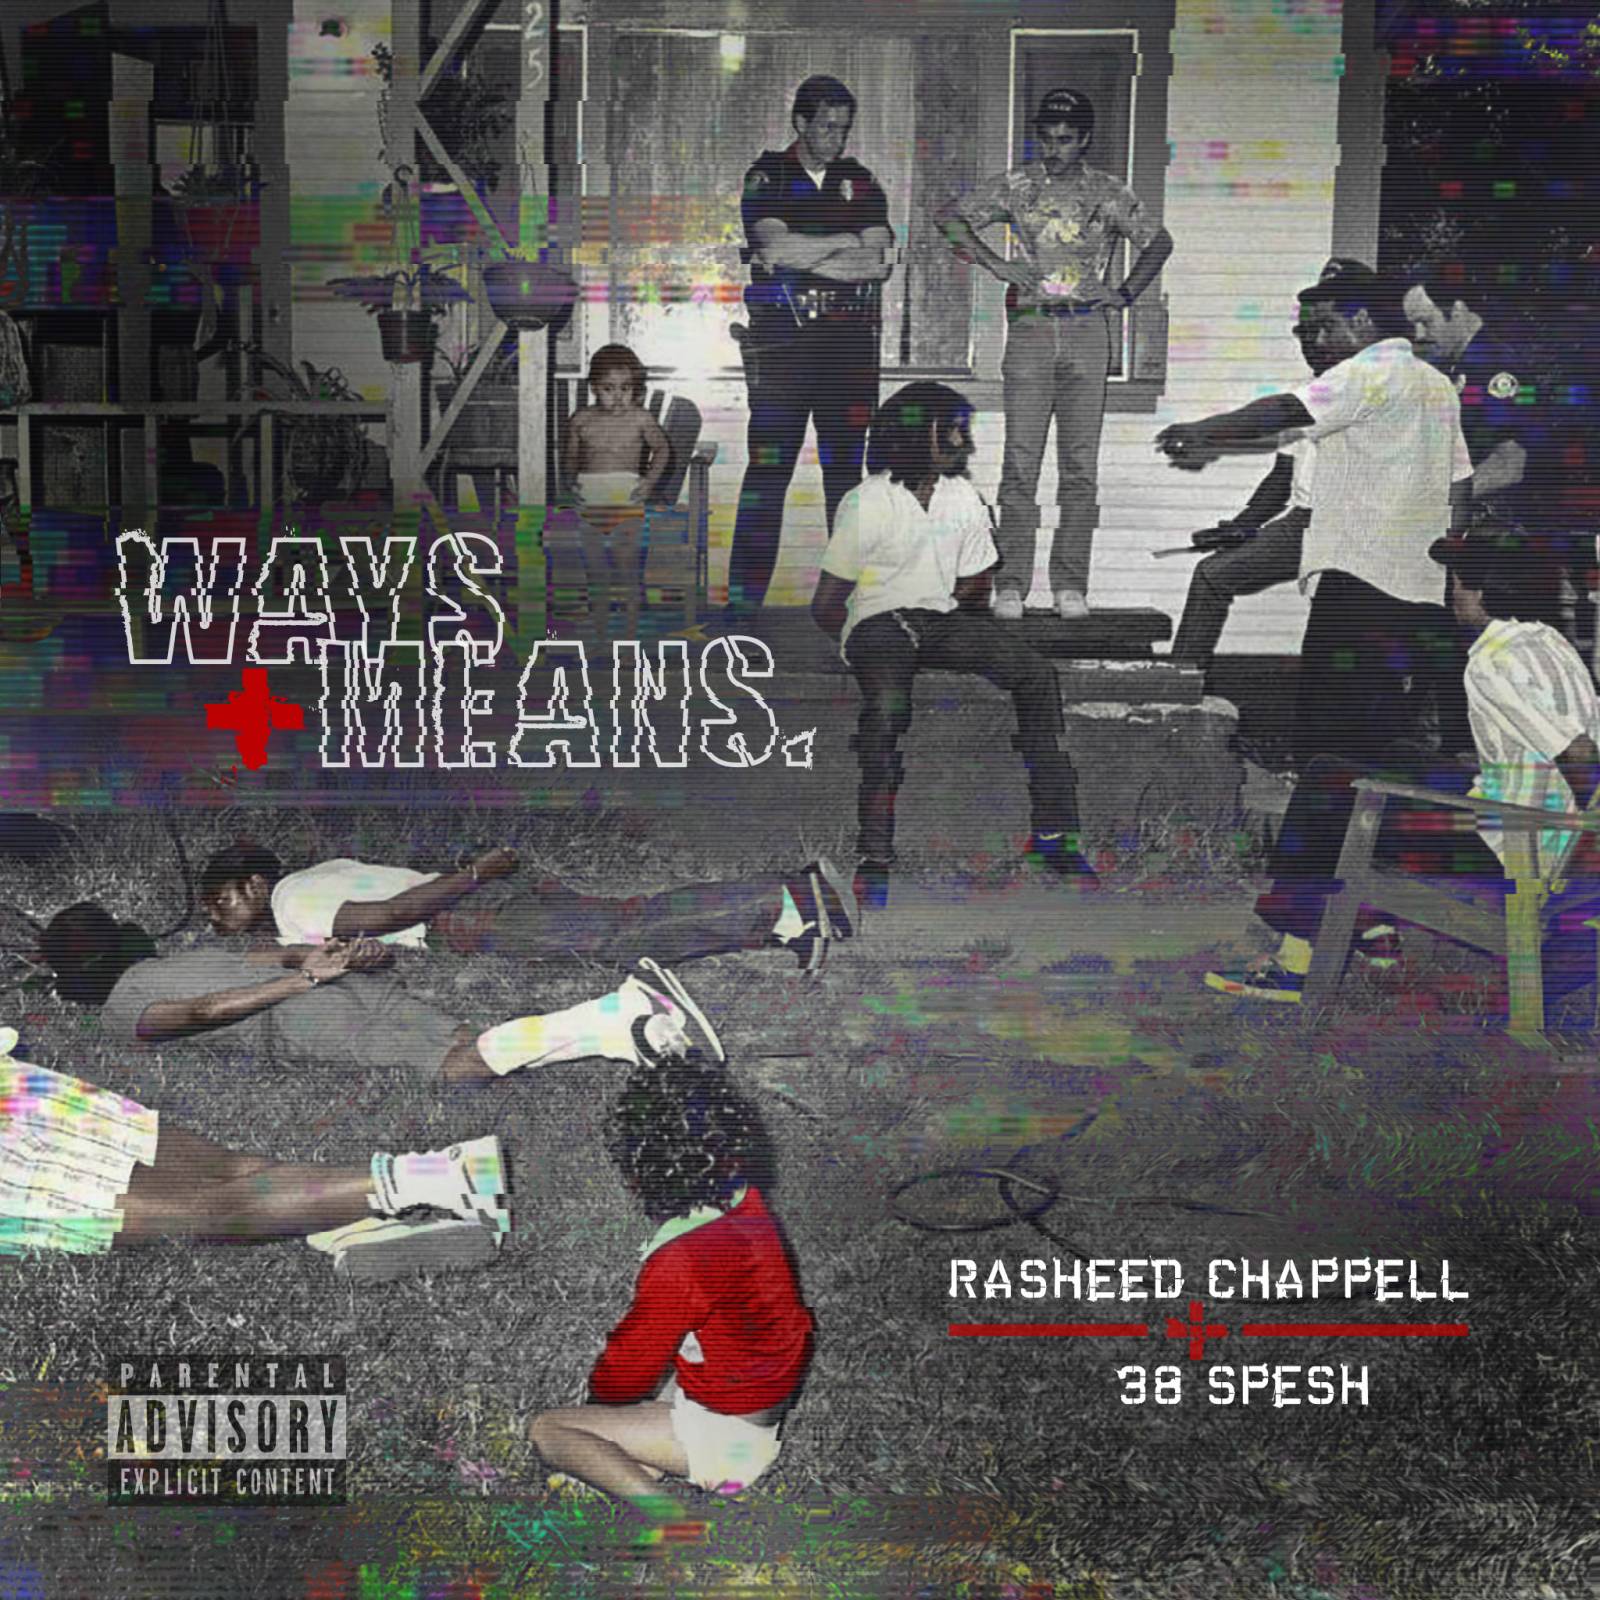 Rasheed Chappell Enlists 38 Spesh For 'Ways & Means' Album